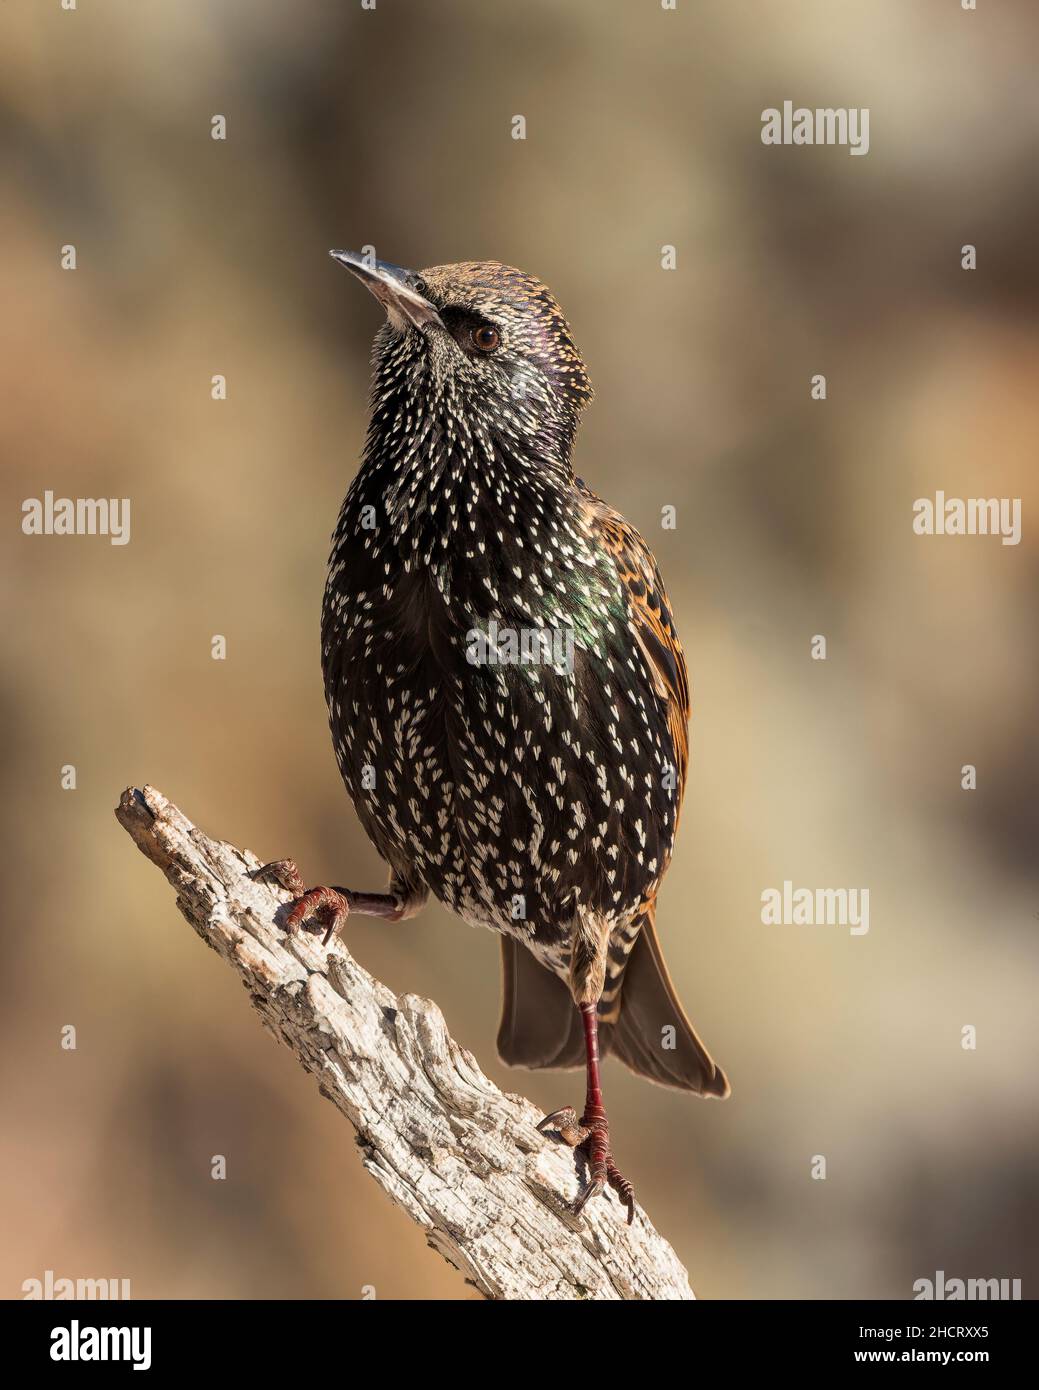 A European starling stands for a moment in Wyoming Stock Photo